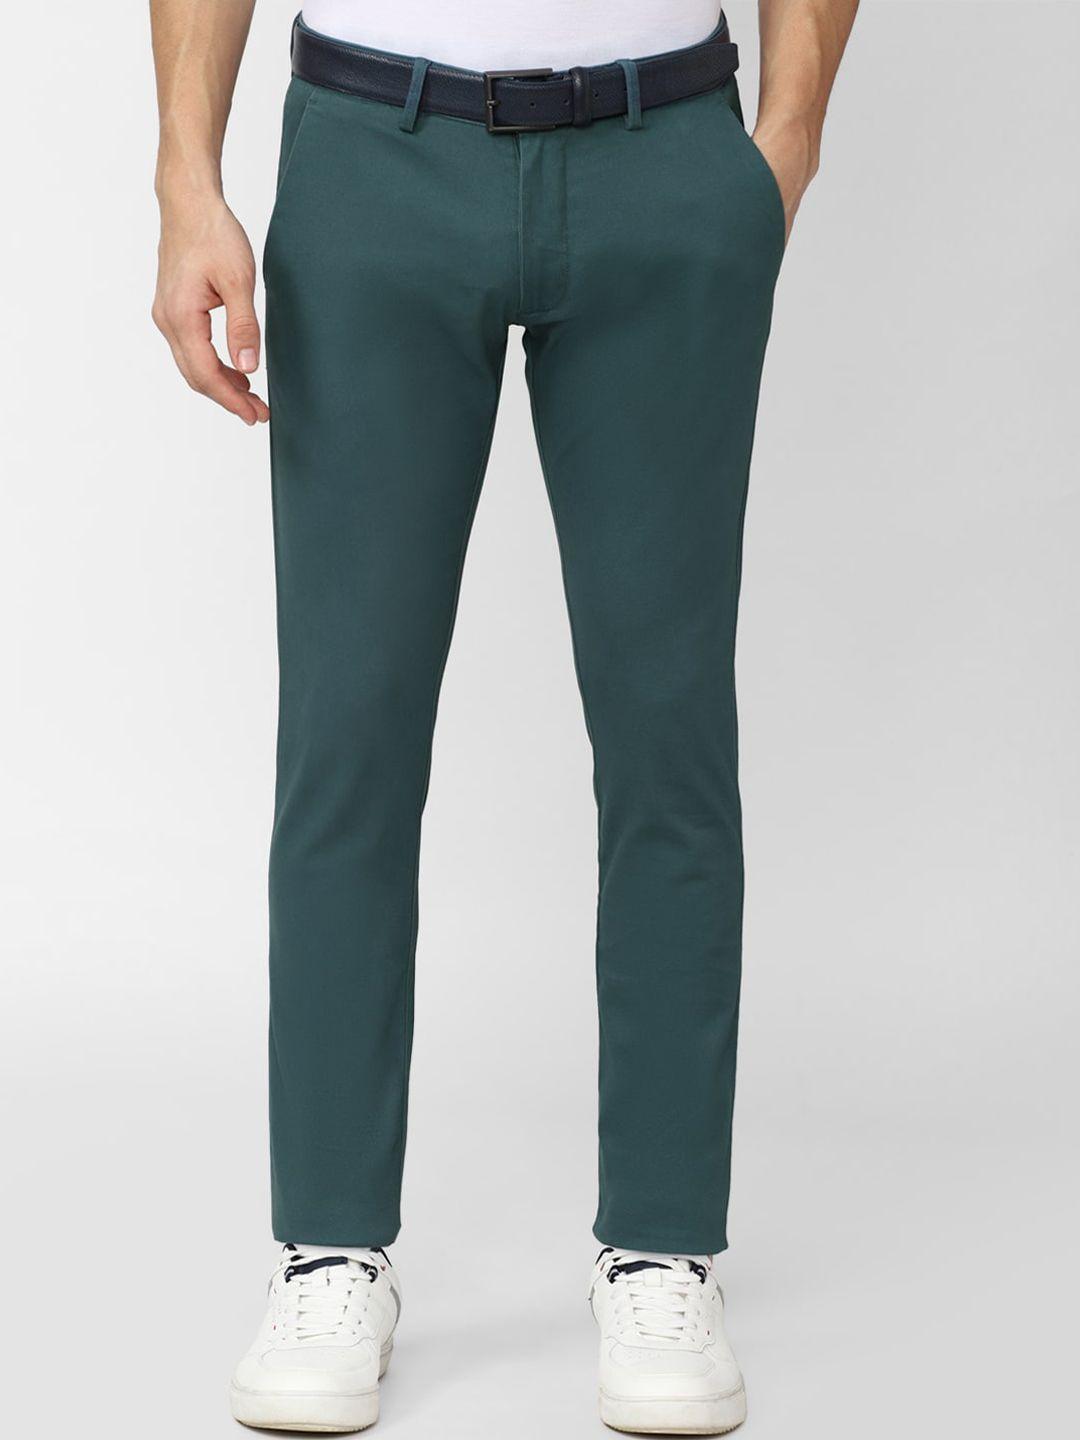 peter england casuals men green skinny fit trouser